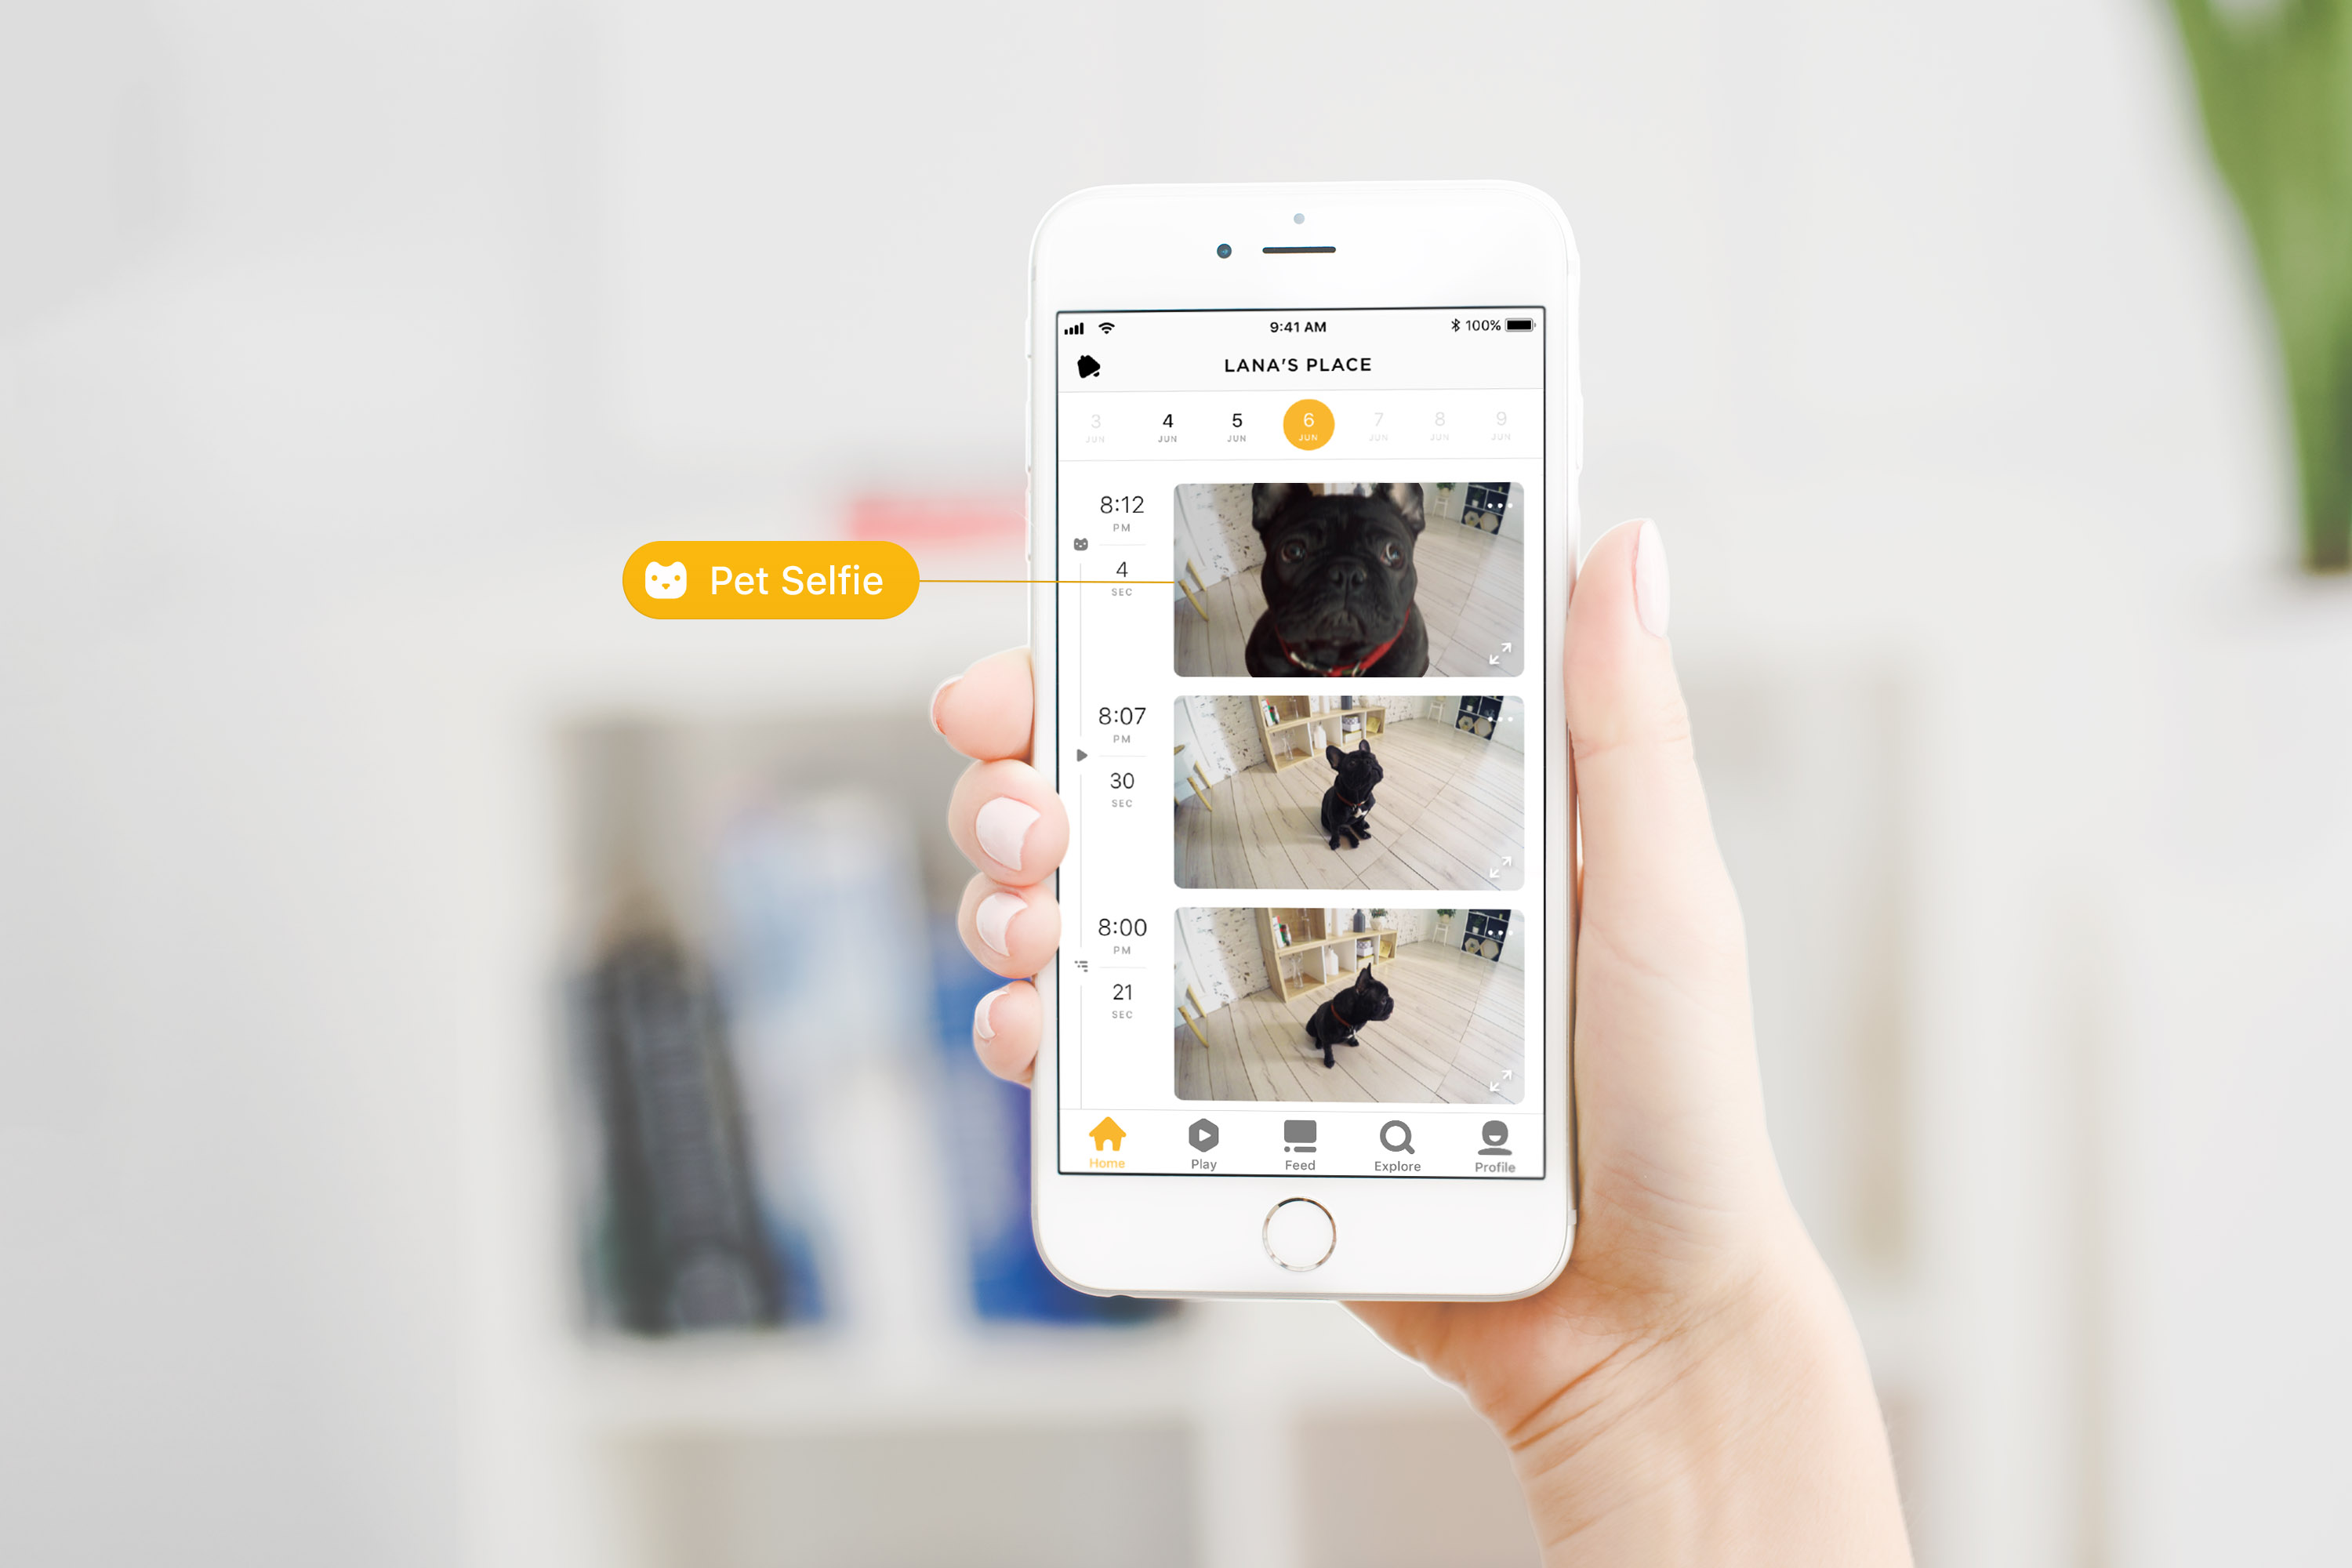 Pet cameras from Petcube can take pet selfies, let Fido ‘call’ home